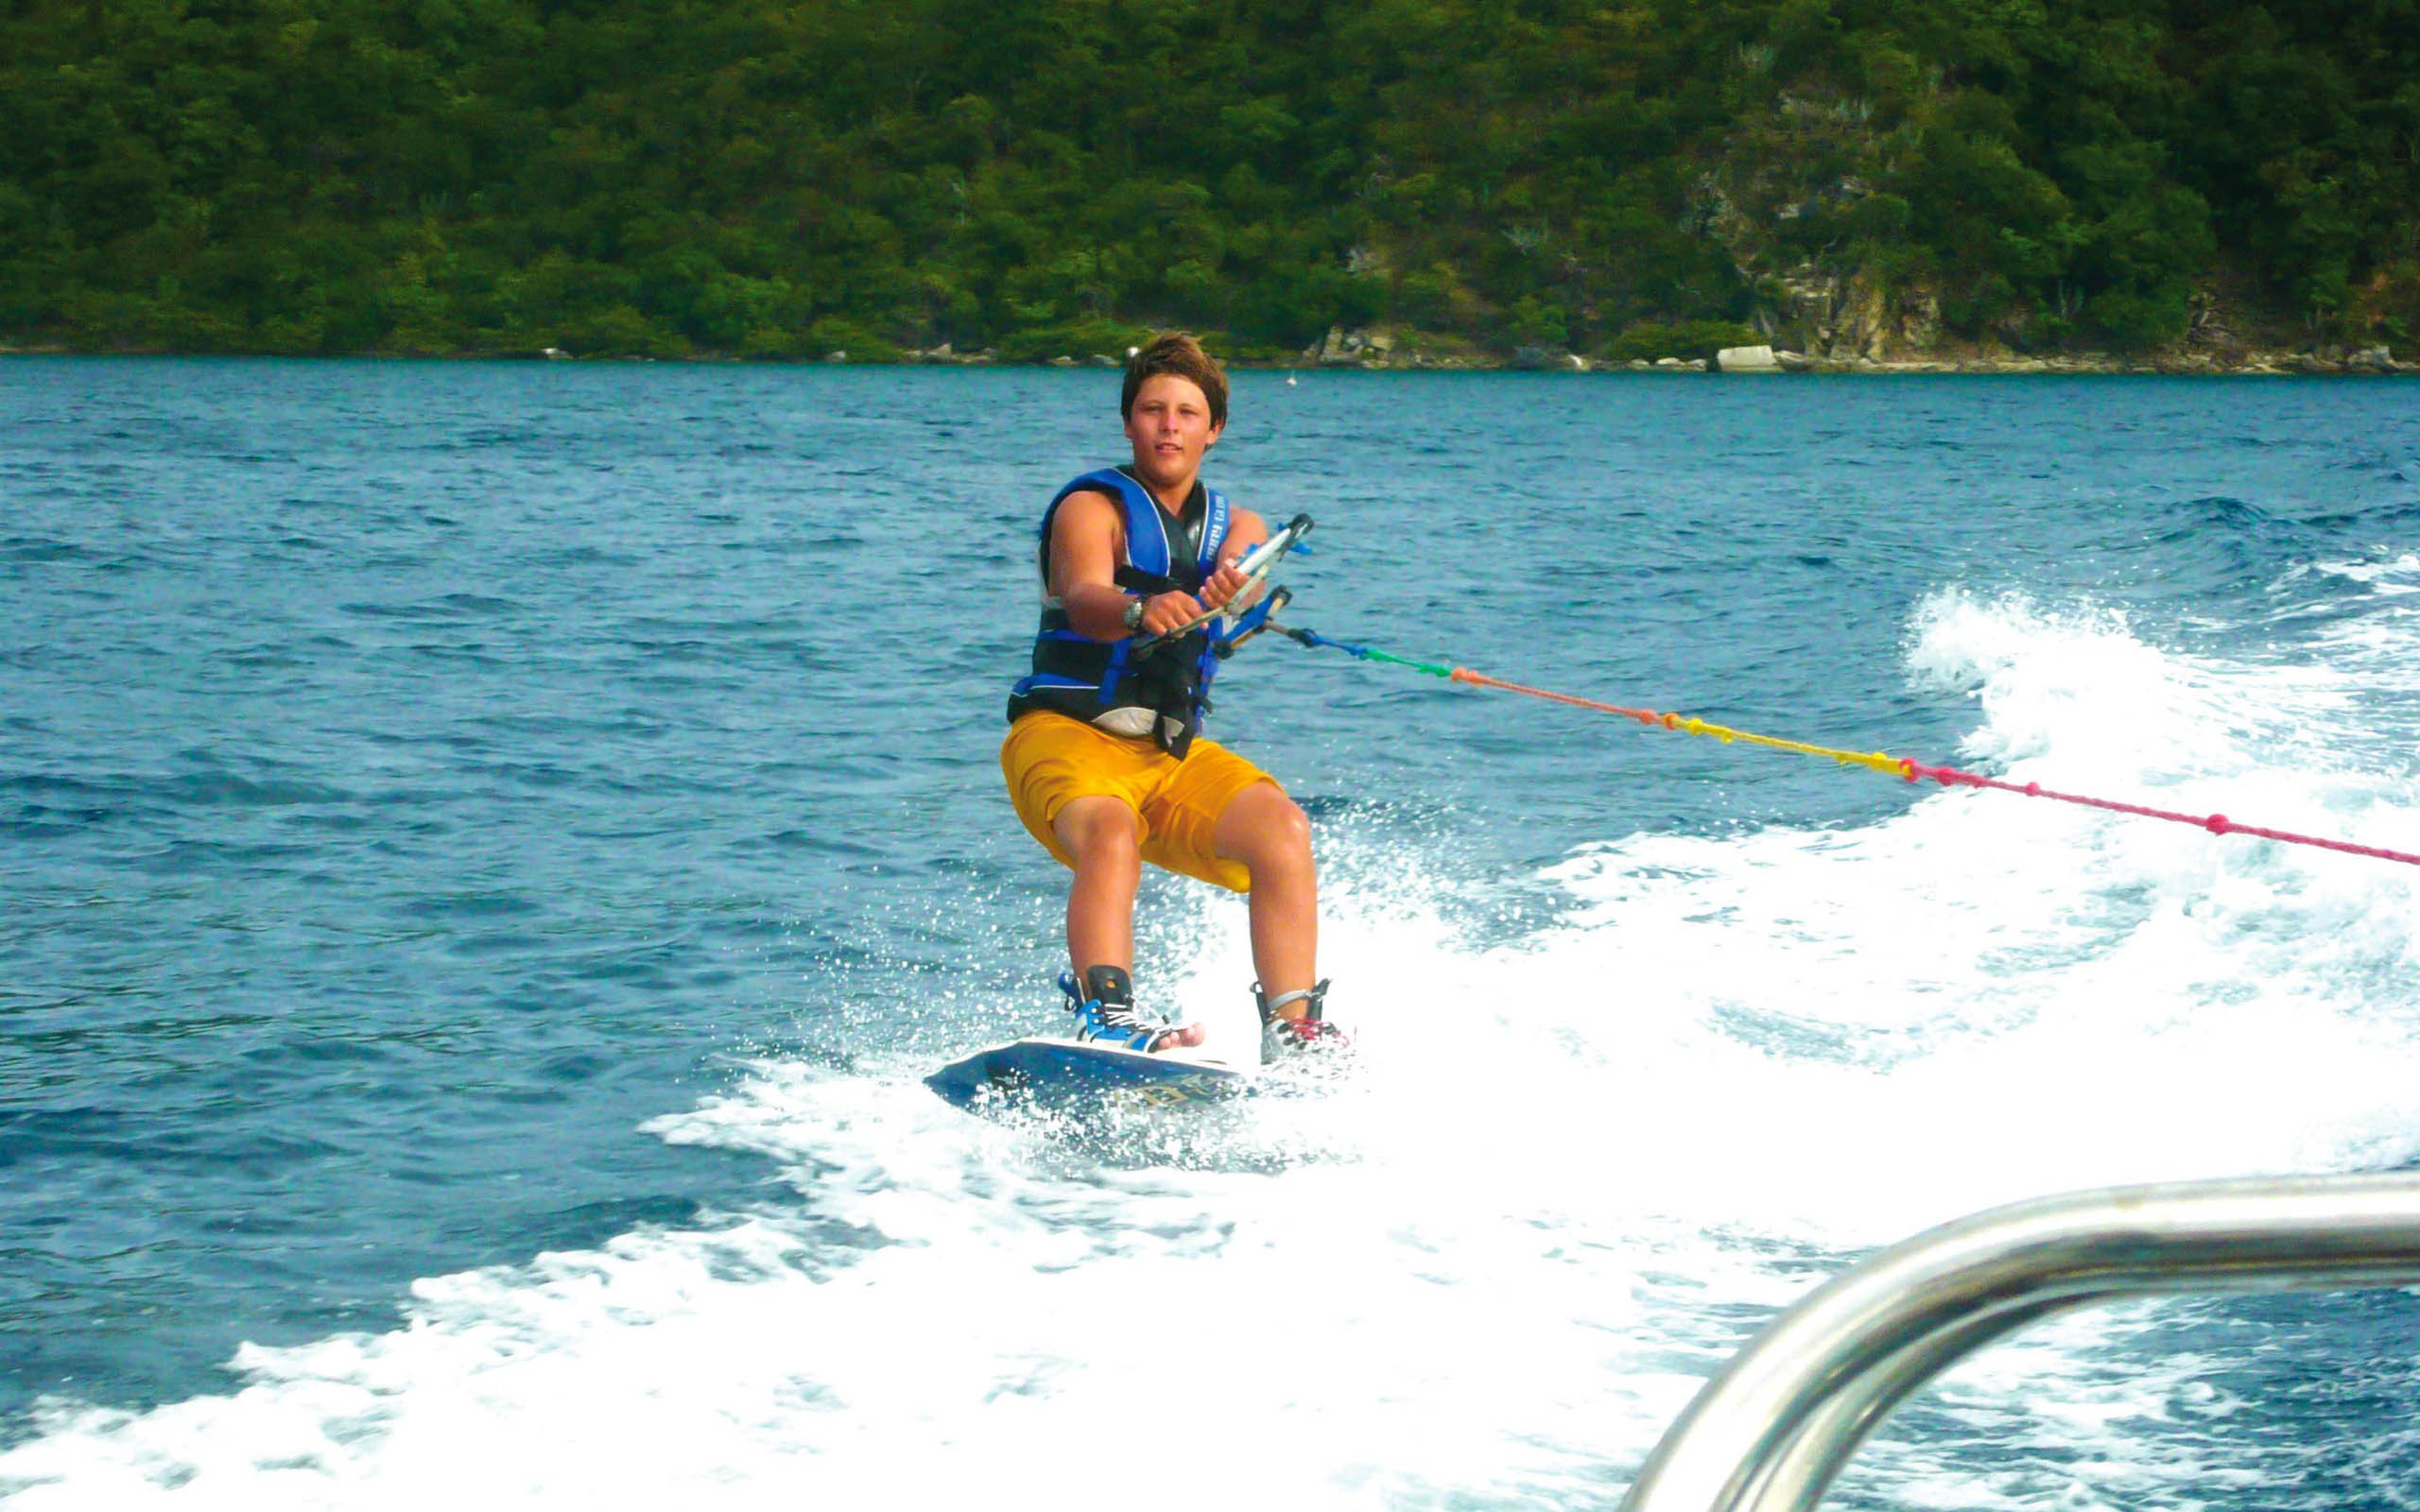 A man is water skiing on a boat.